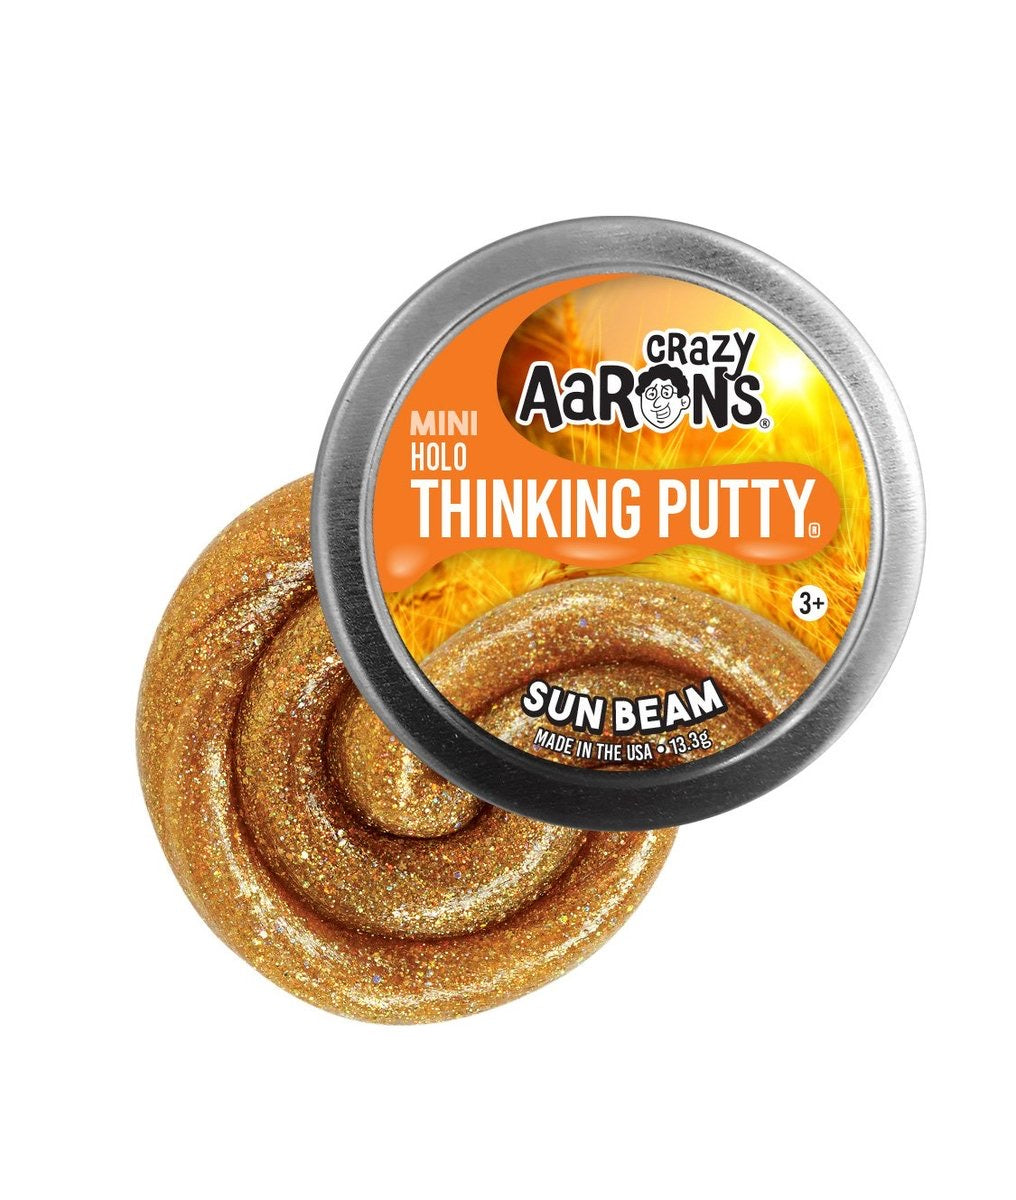 Sunbeam 2” Tin Thinking Putty by Crazy Aaron’s